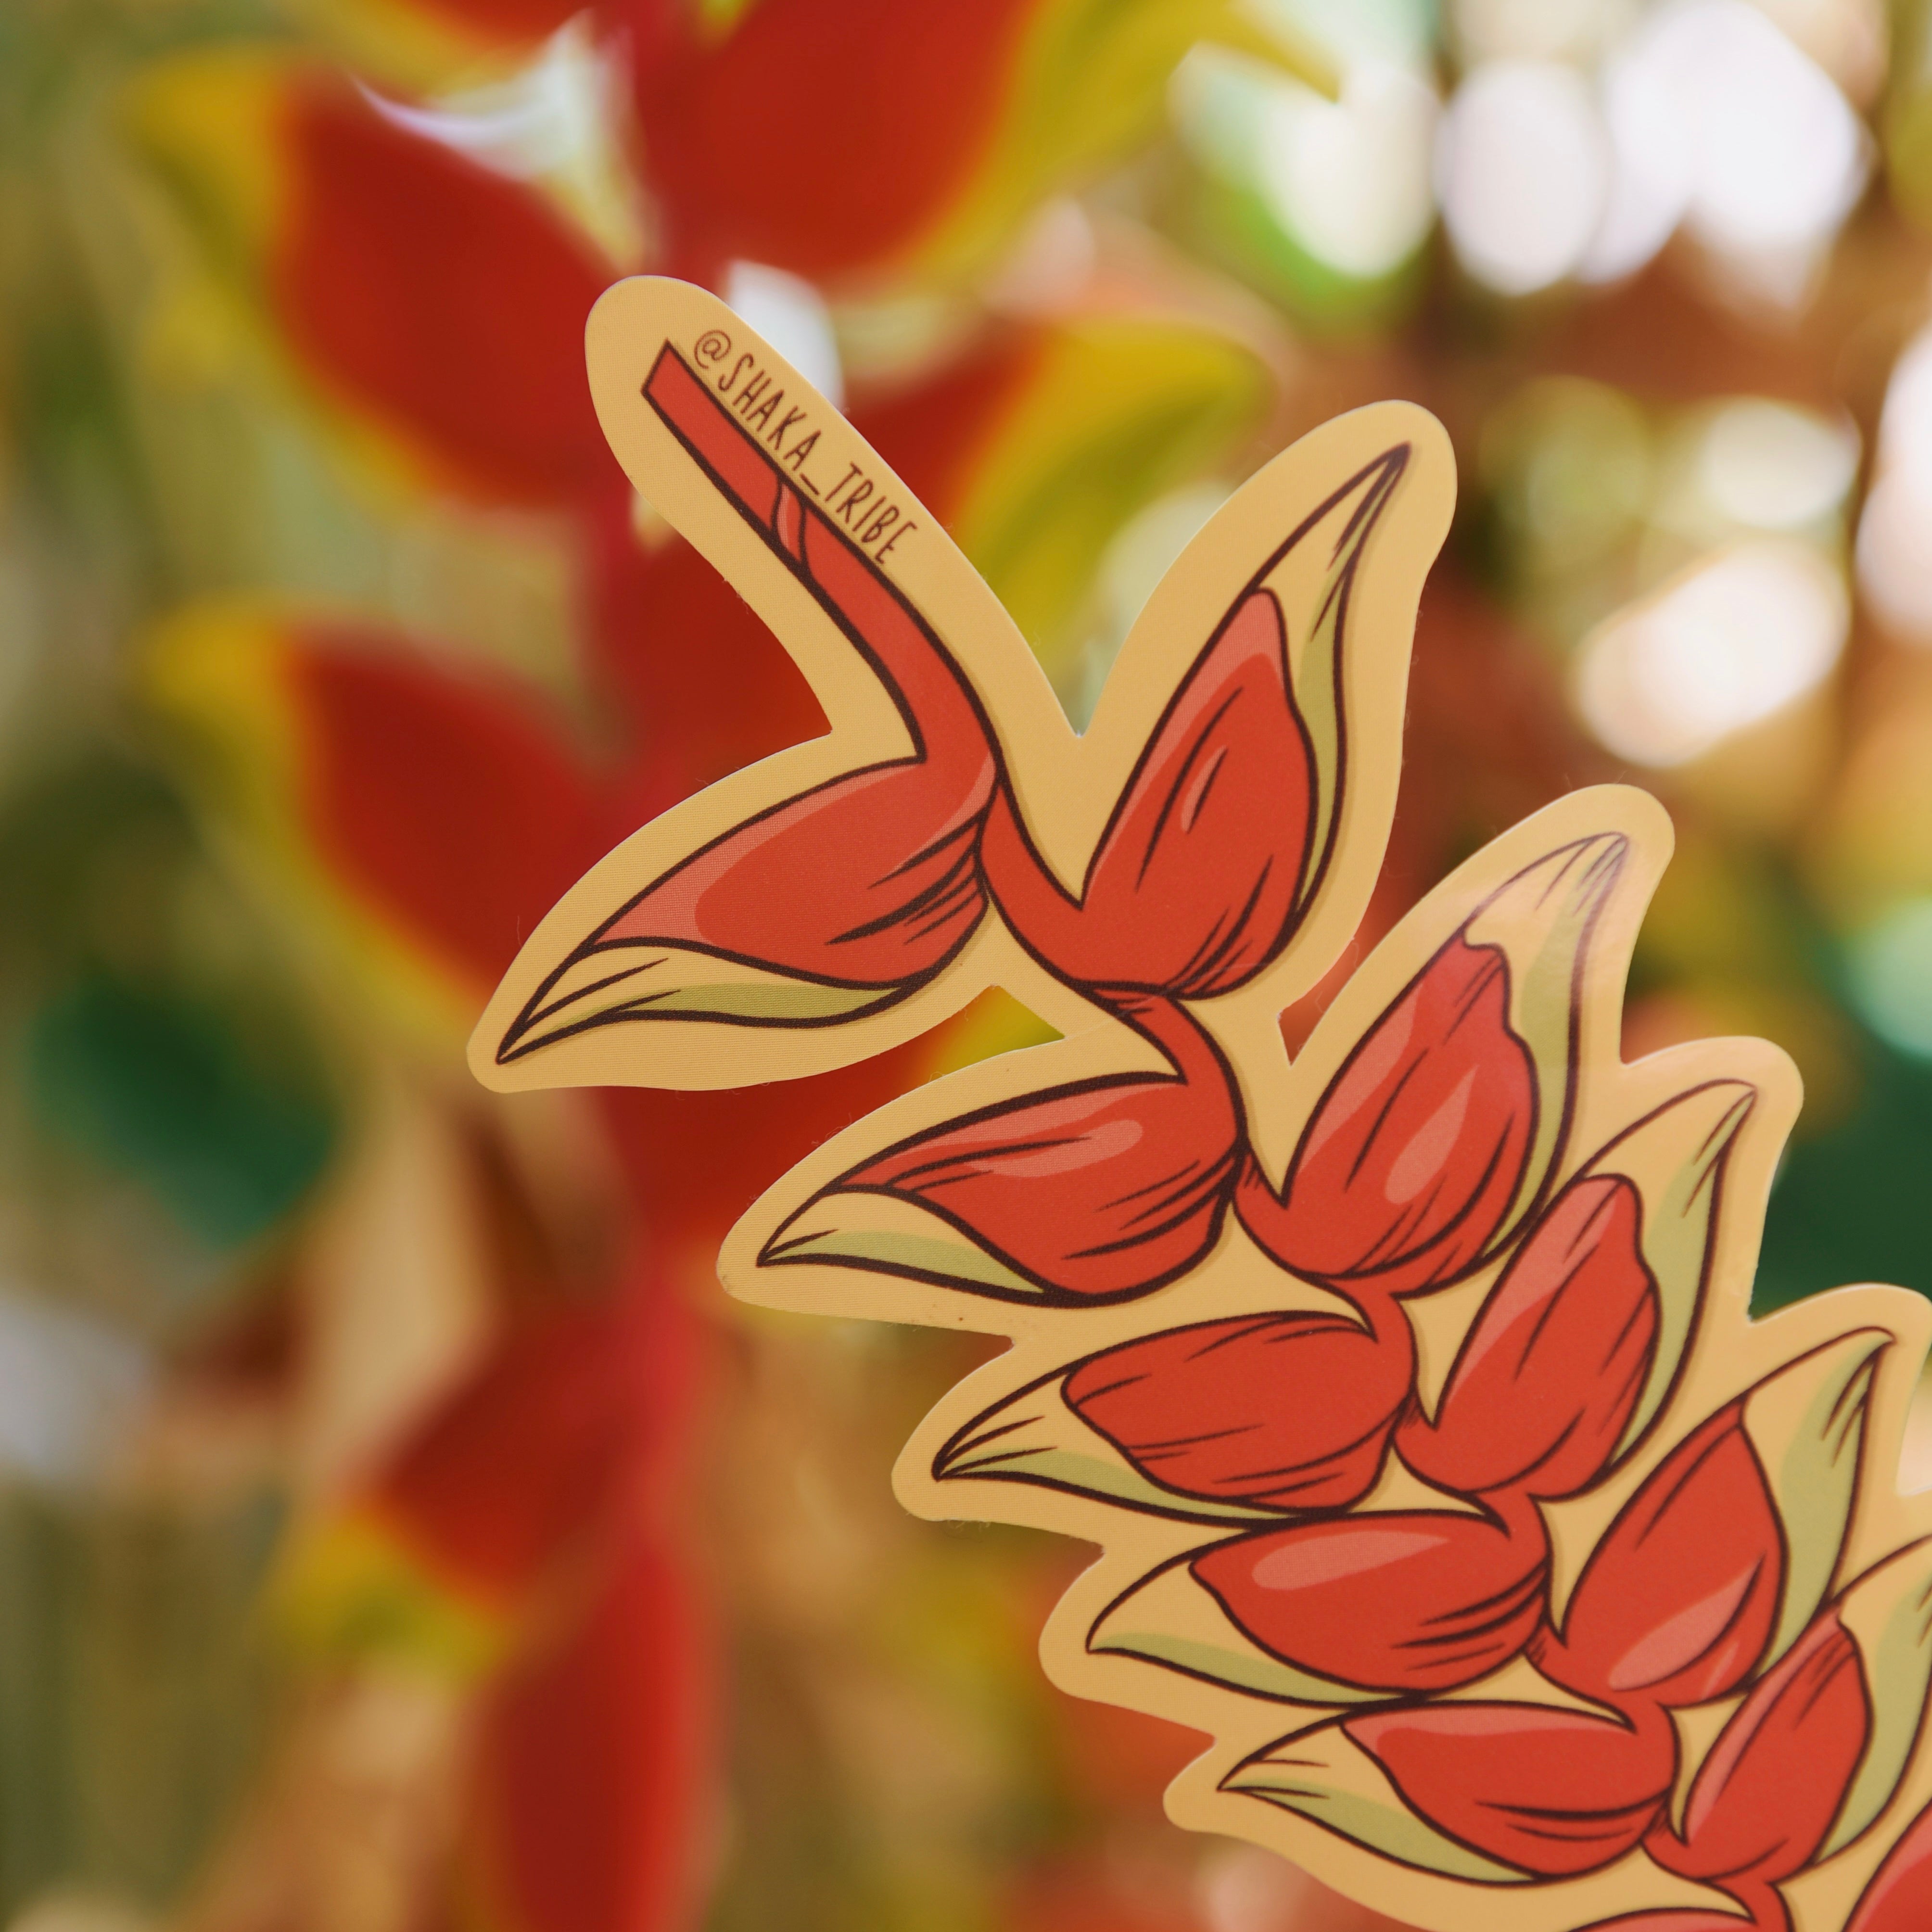 Mana (Unseen Power) - Heliconia Sticker